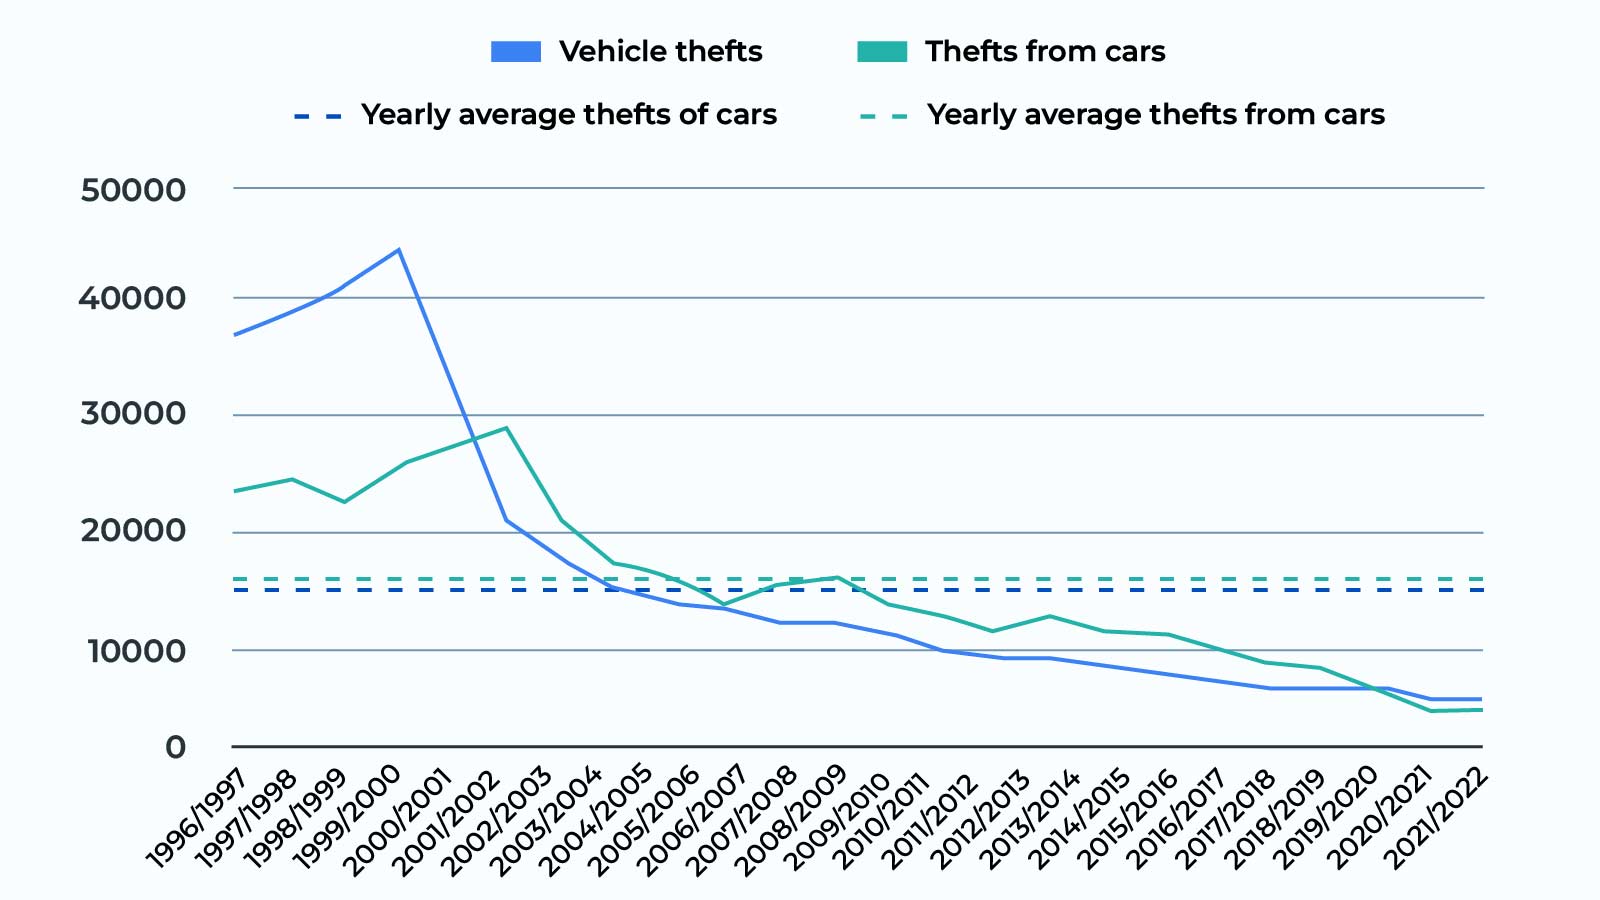 Car thefts in Northern Ireland across the years